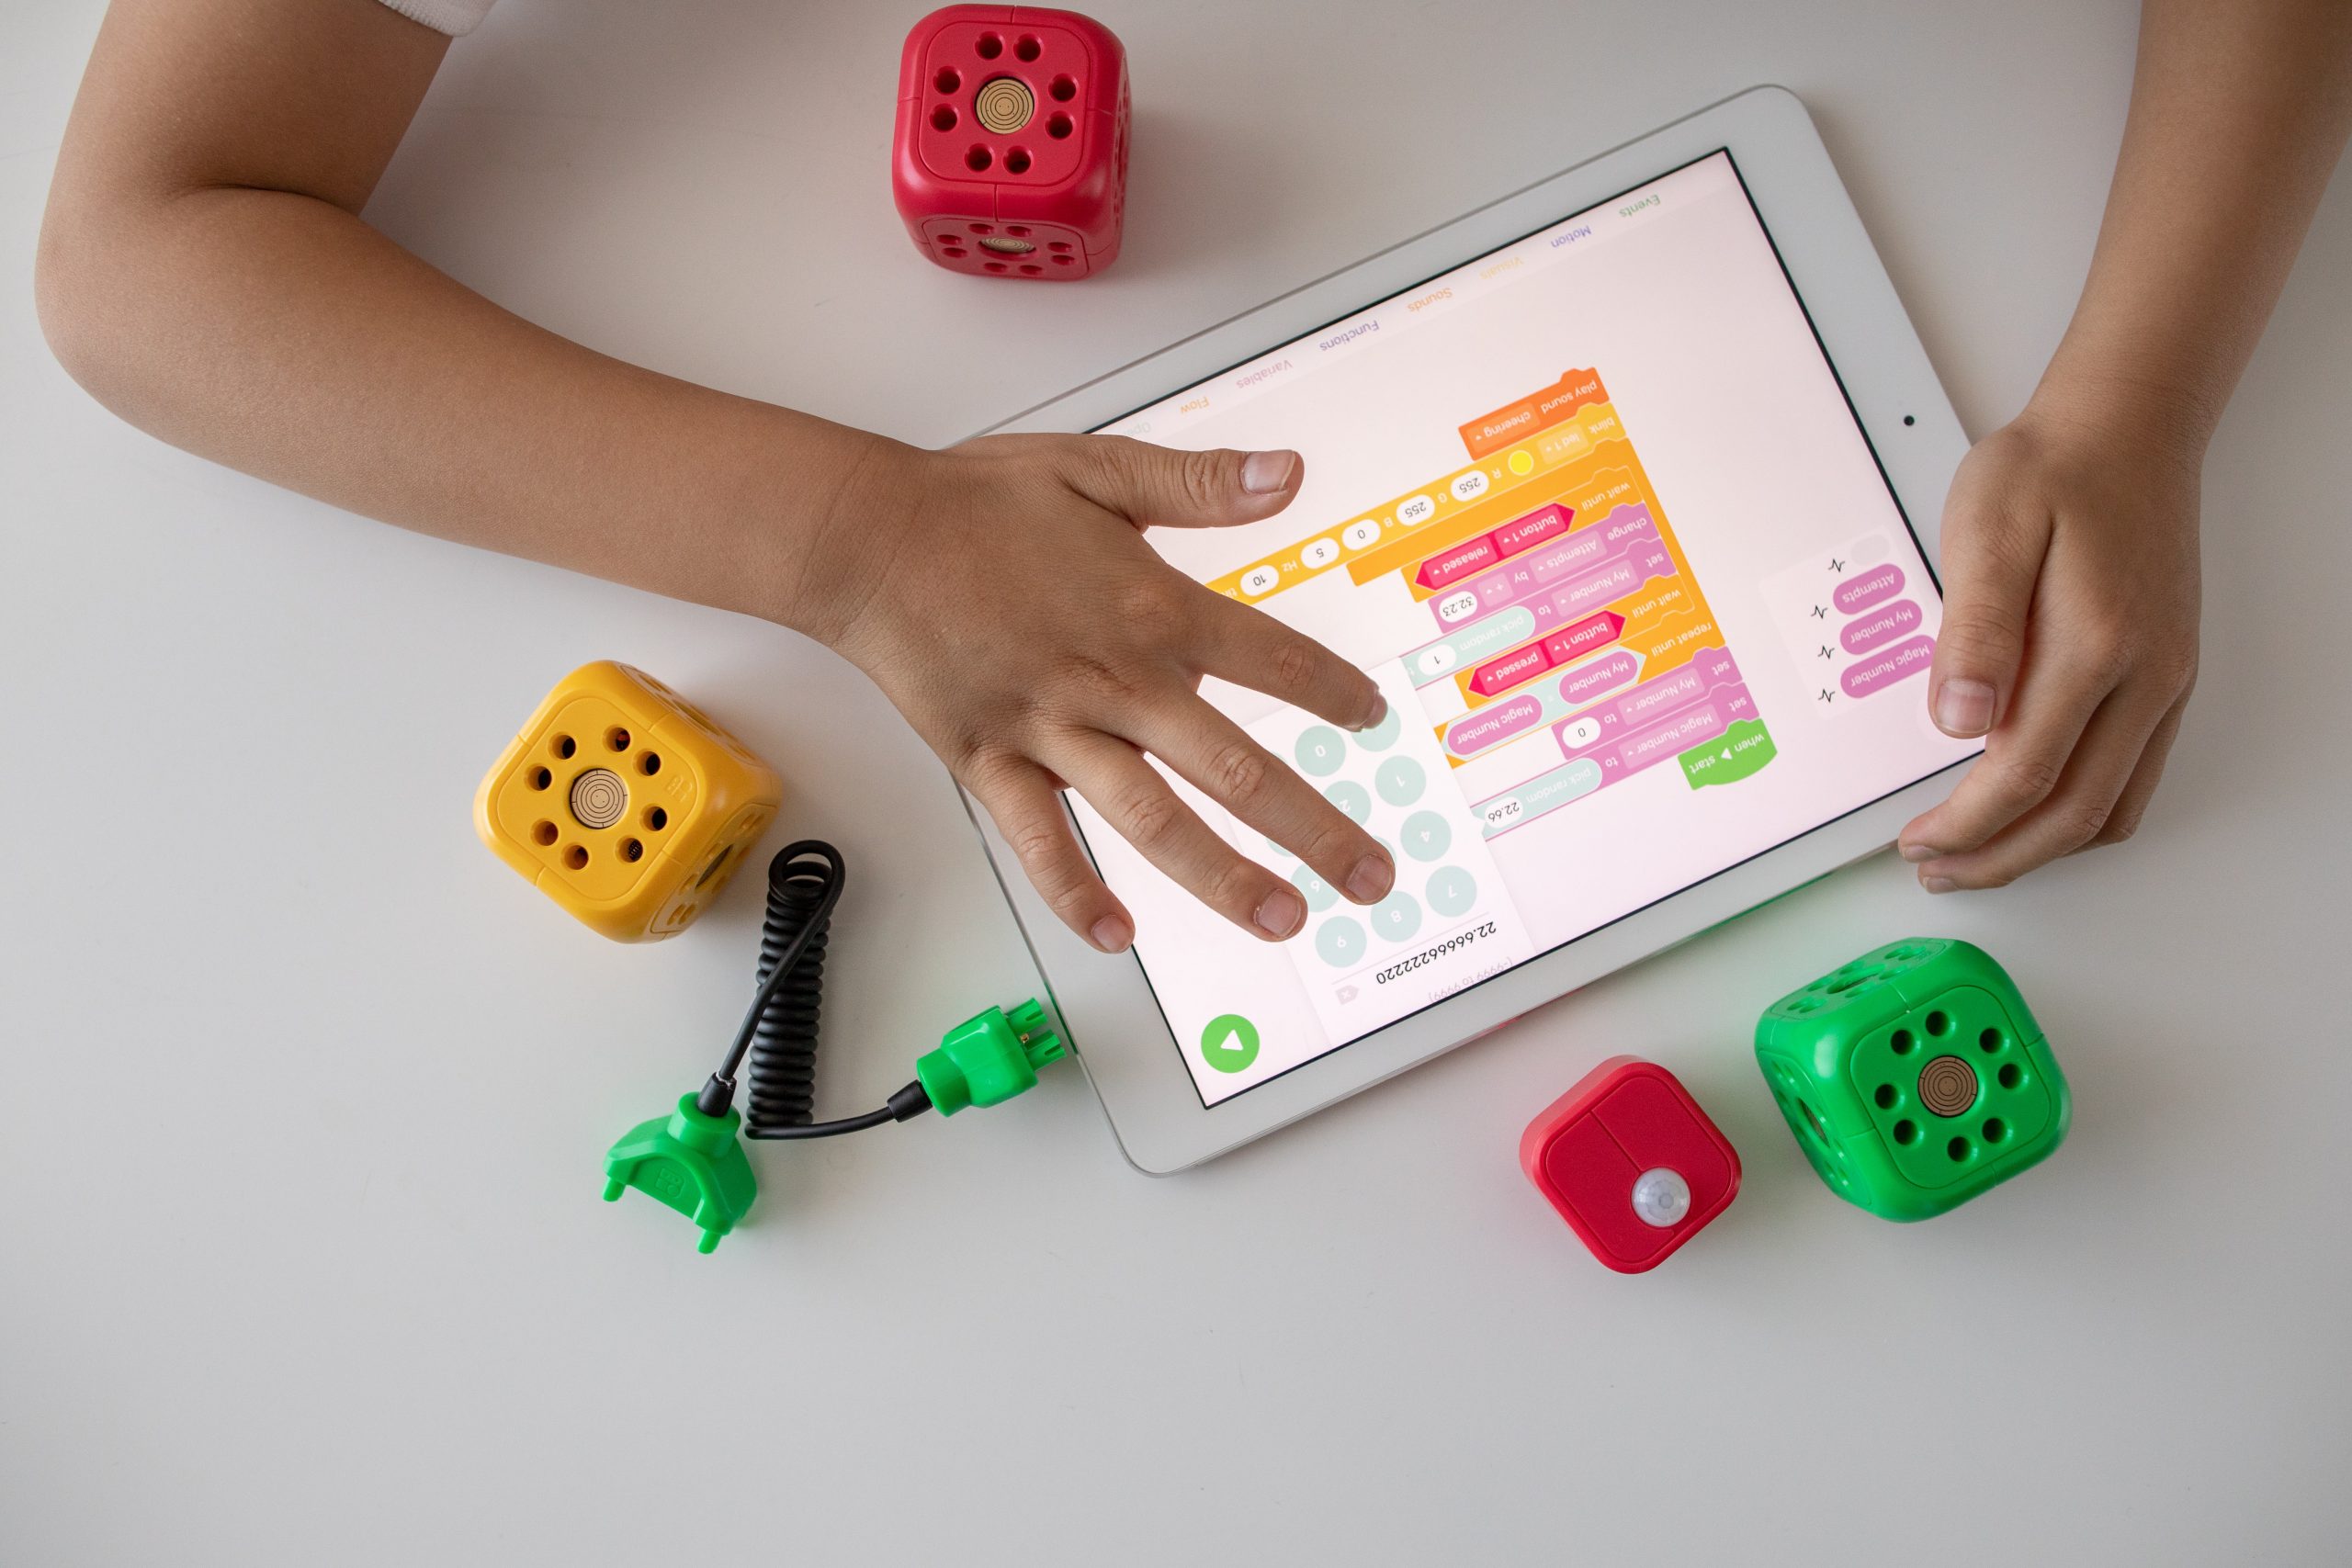 in an article about math games, a kid playing a math game on a tablet